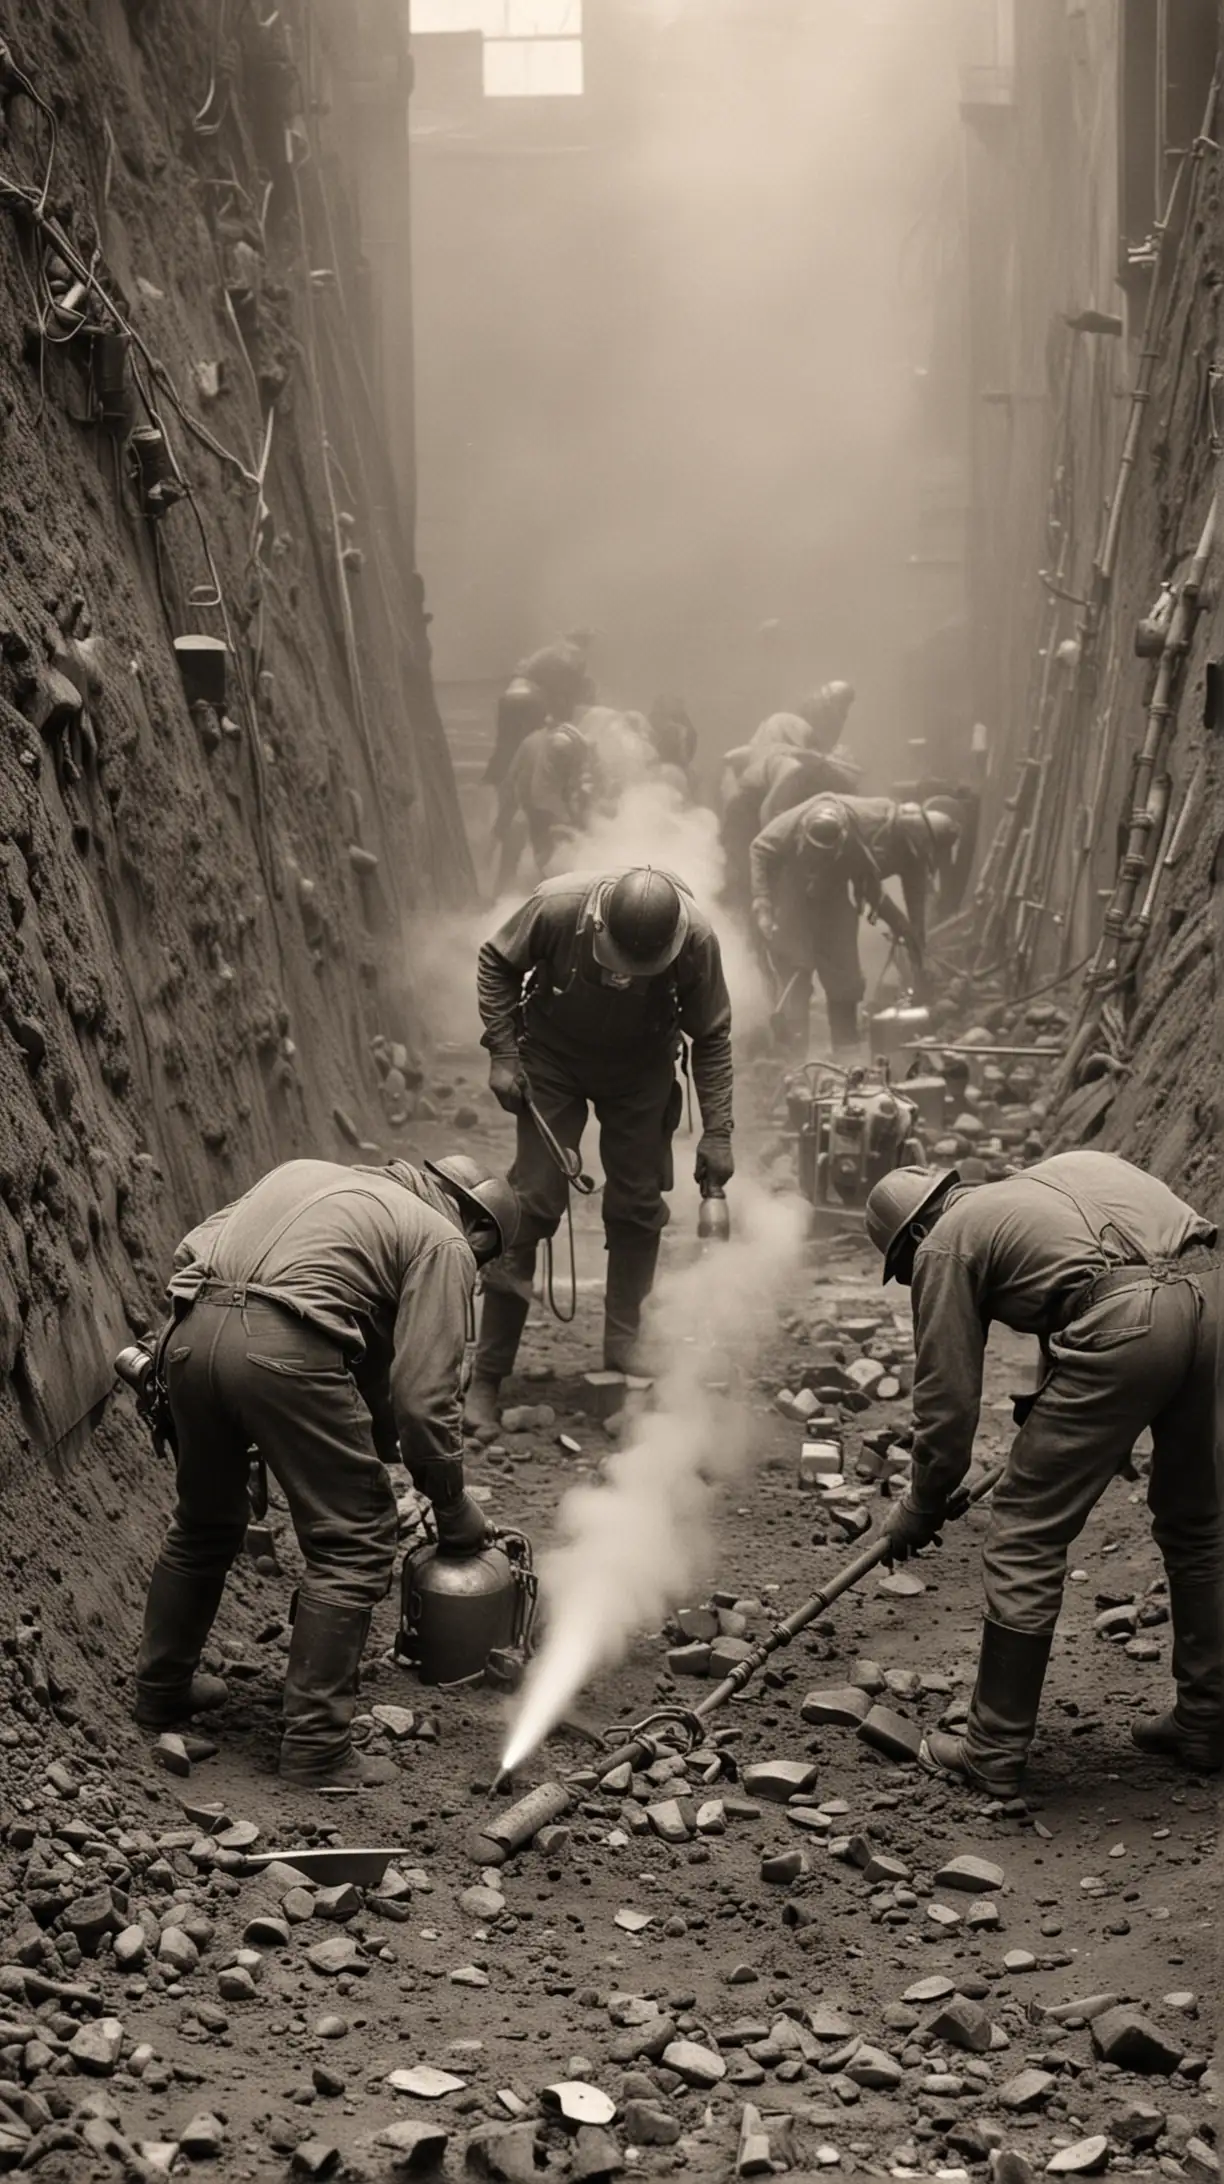 1900s Workers Drilling Encounter Toxic Gas